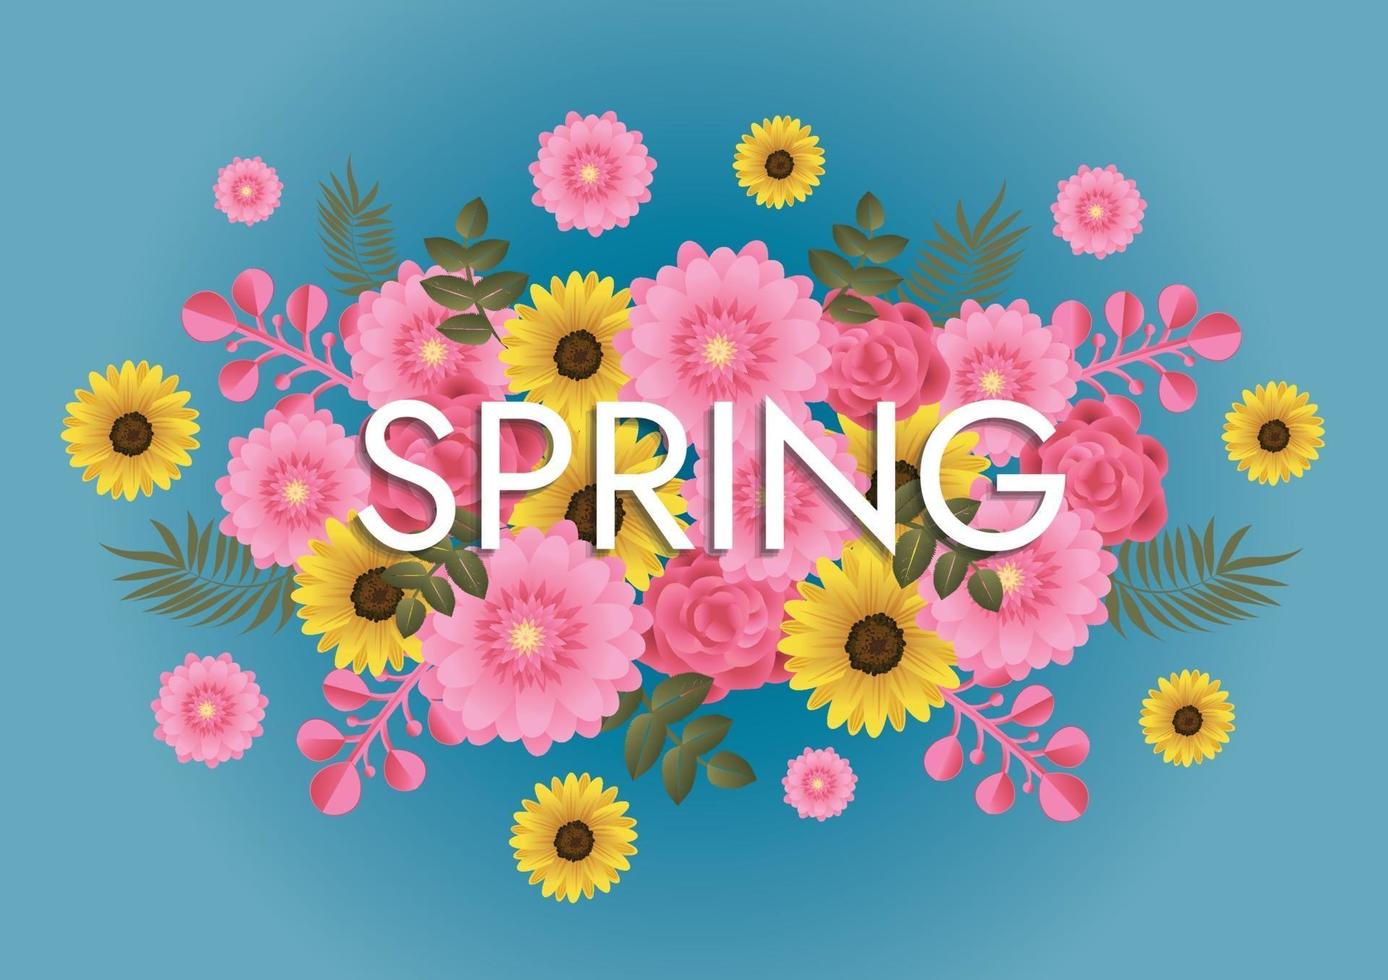 Florals hello spring background for holidays mood vector